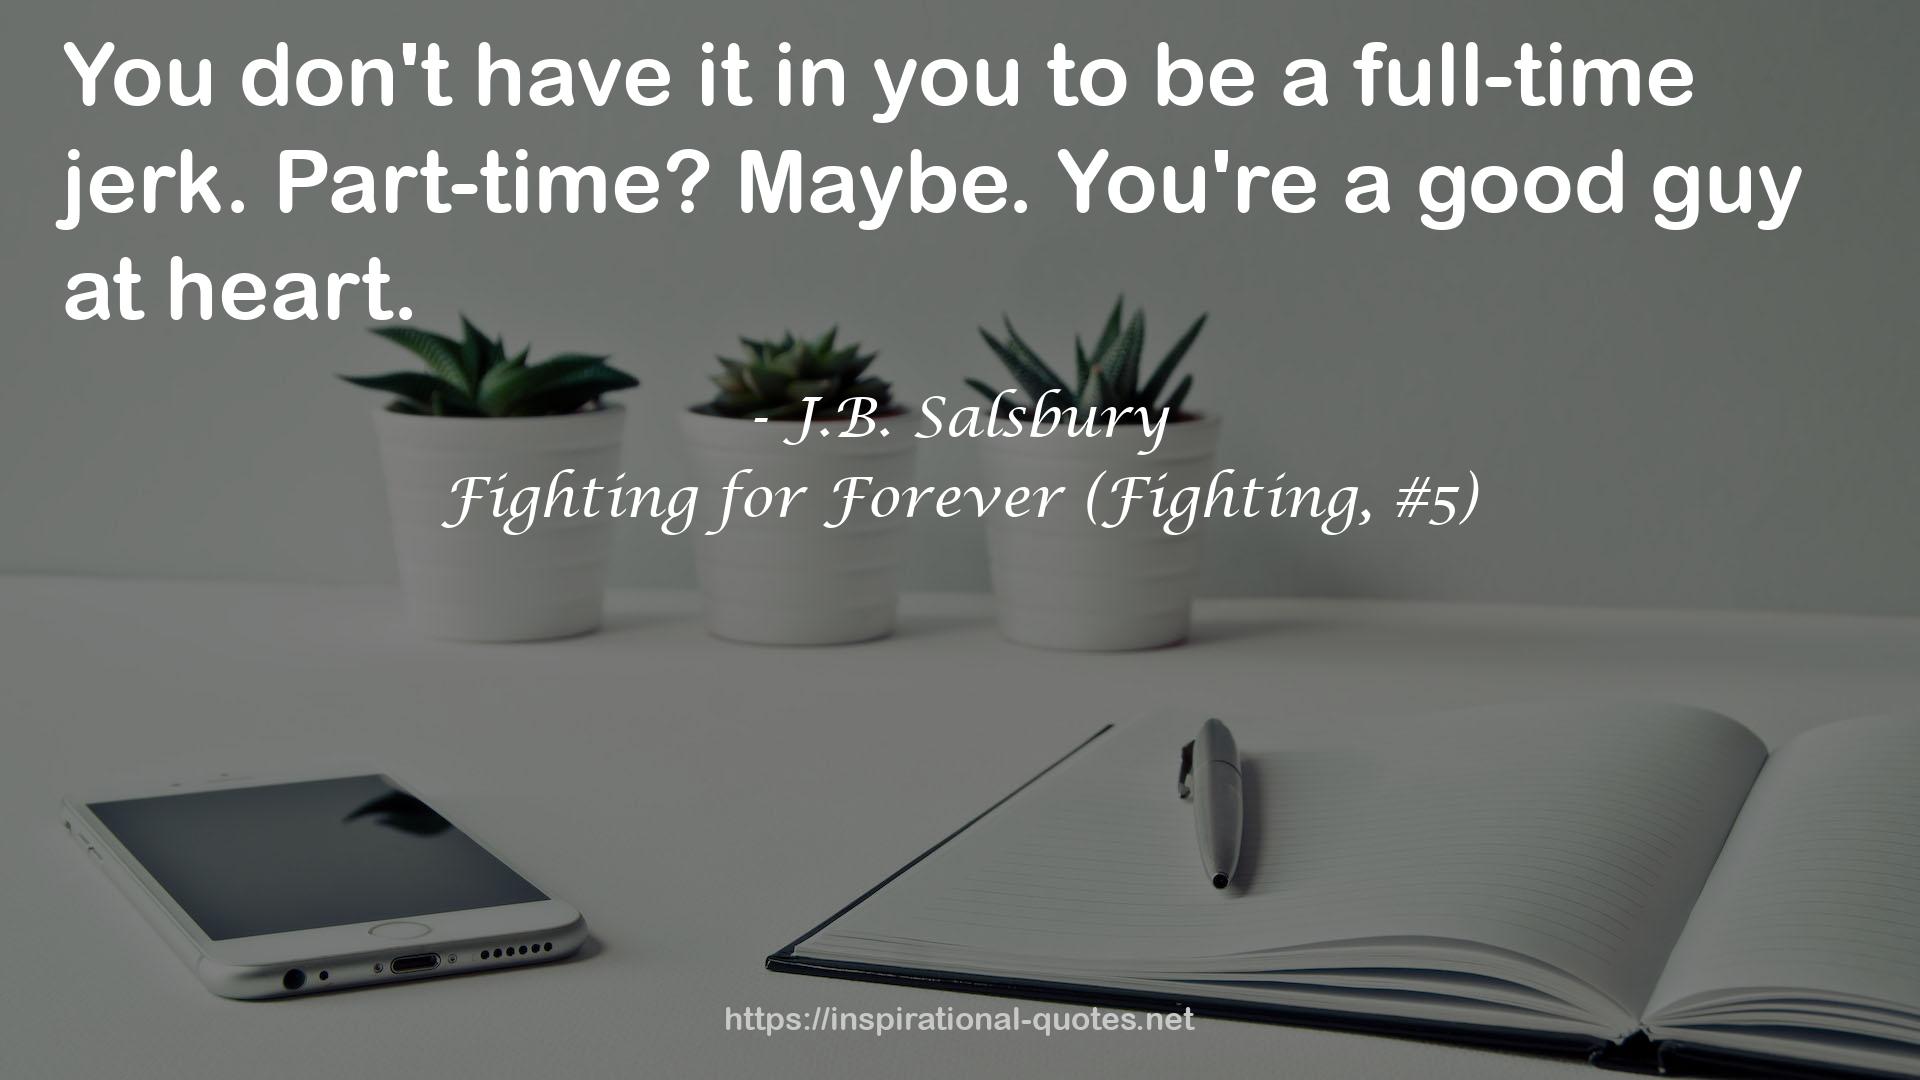 Fighting for Forever (Fighting, #5) QUOTES